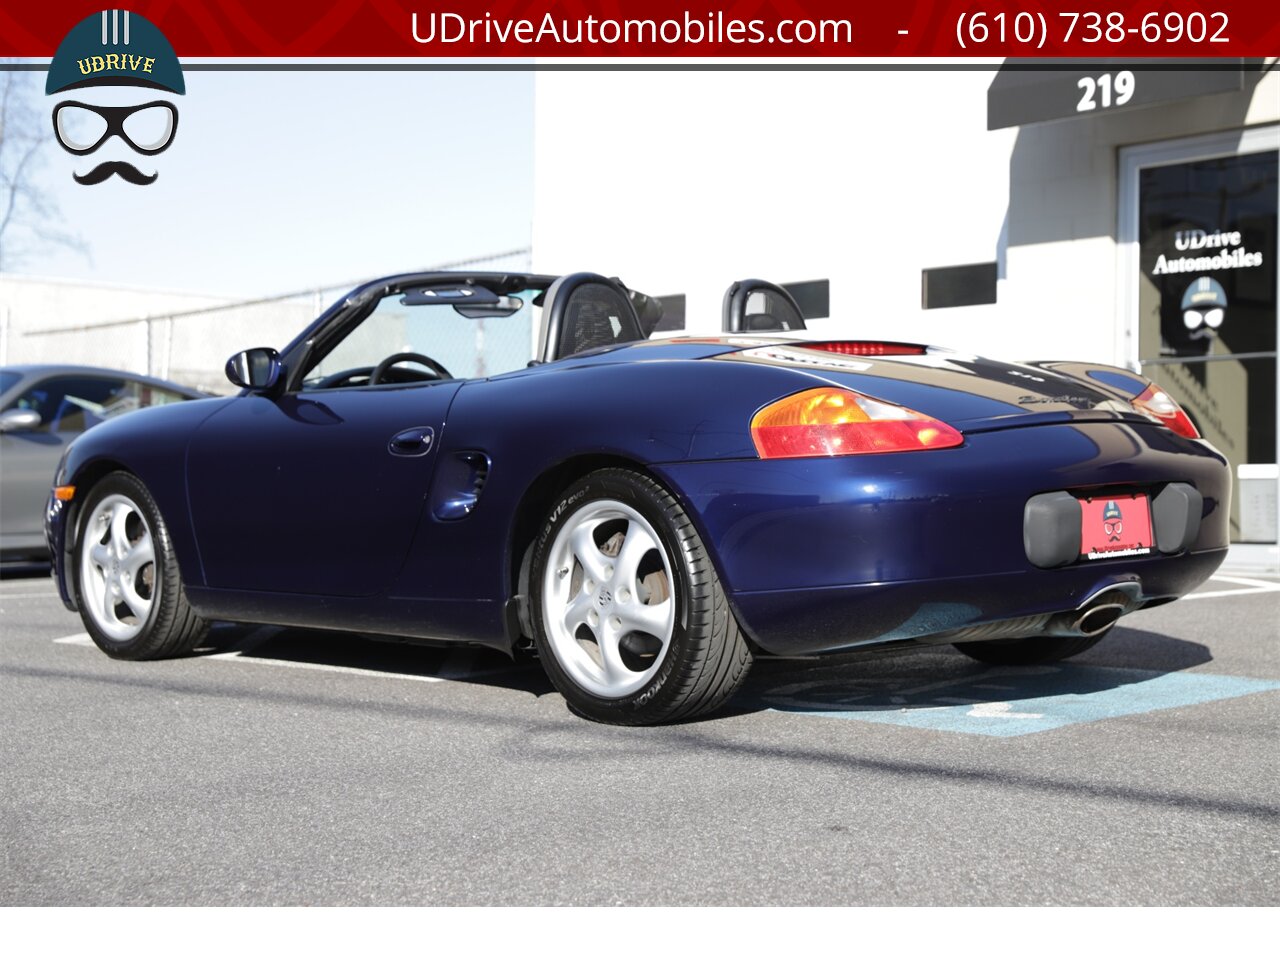 2001 Porsche Boxster 5 Speed Manual Detailed Service History  Same Owner for Last 18 Years Hard Top Included - Photo 19 - West Chester, PA 19382